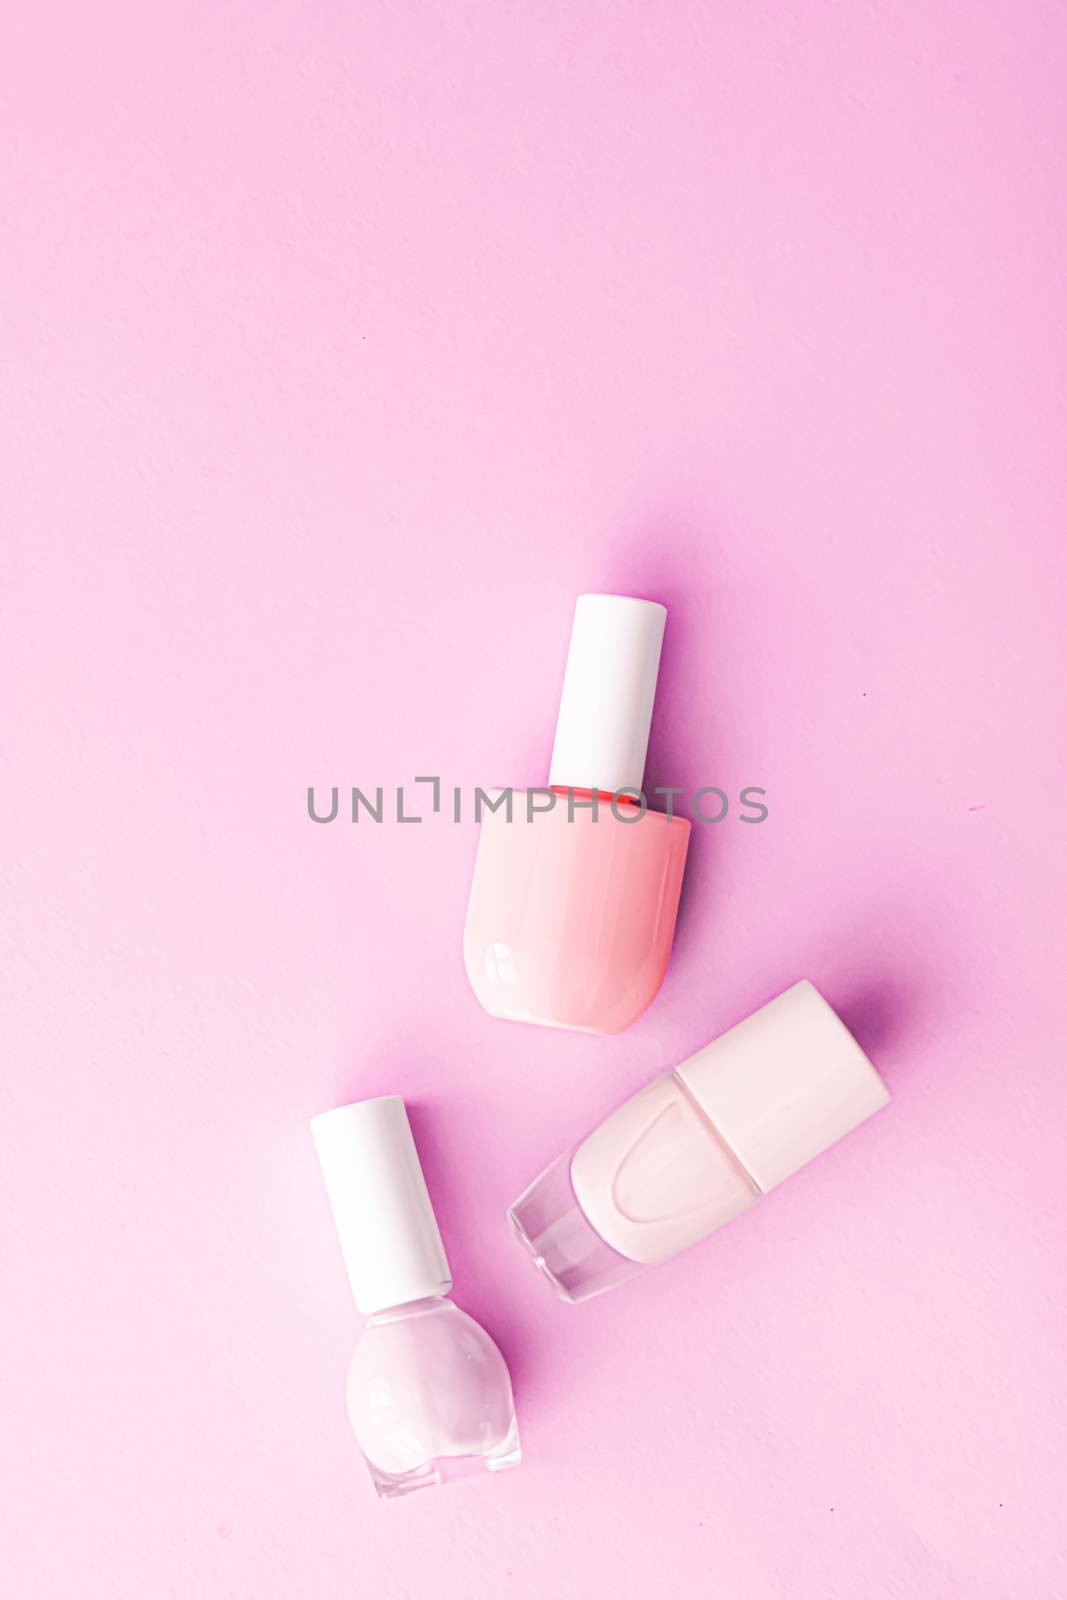 Nail polish bottles on pink background, beauty brand by Anneleven